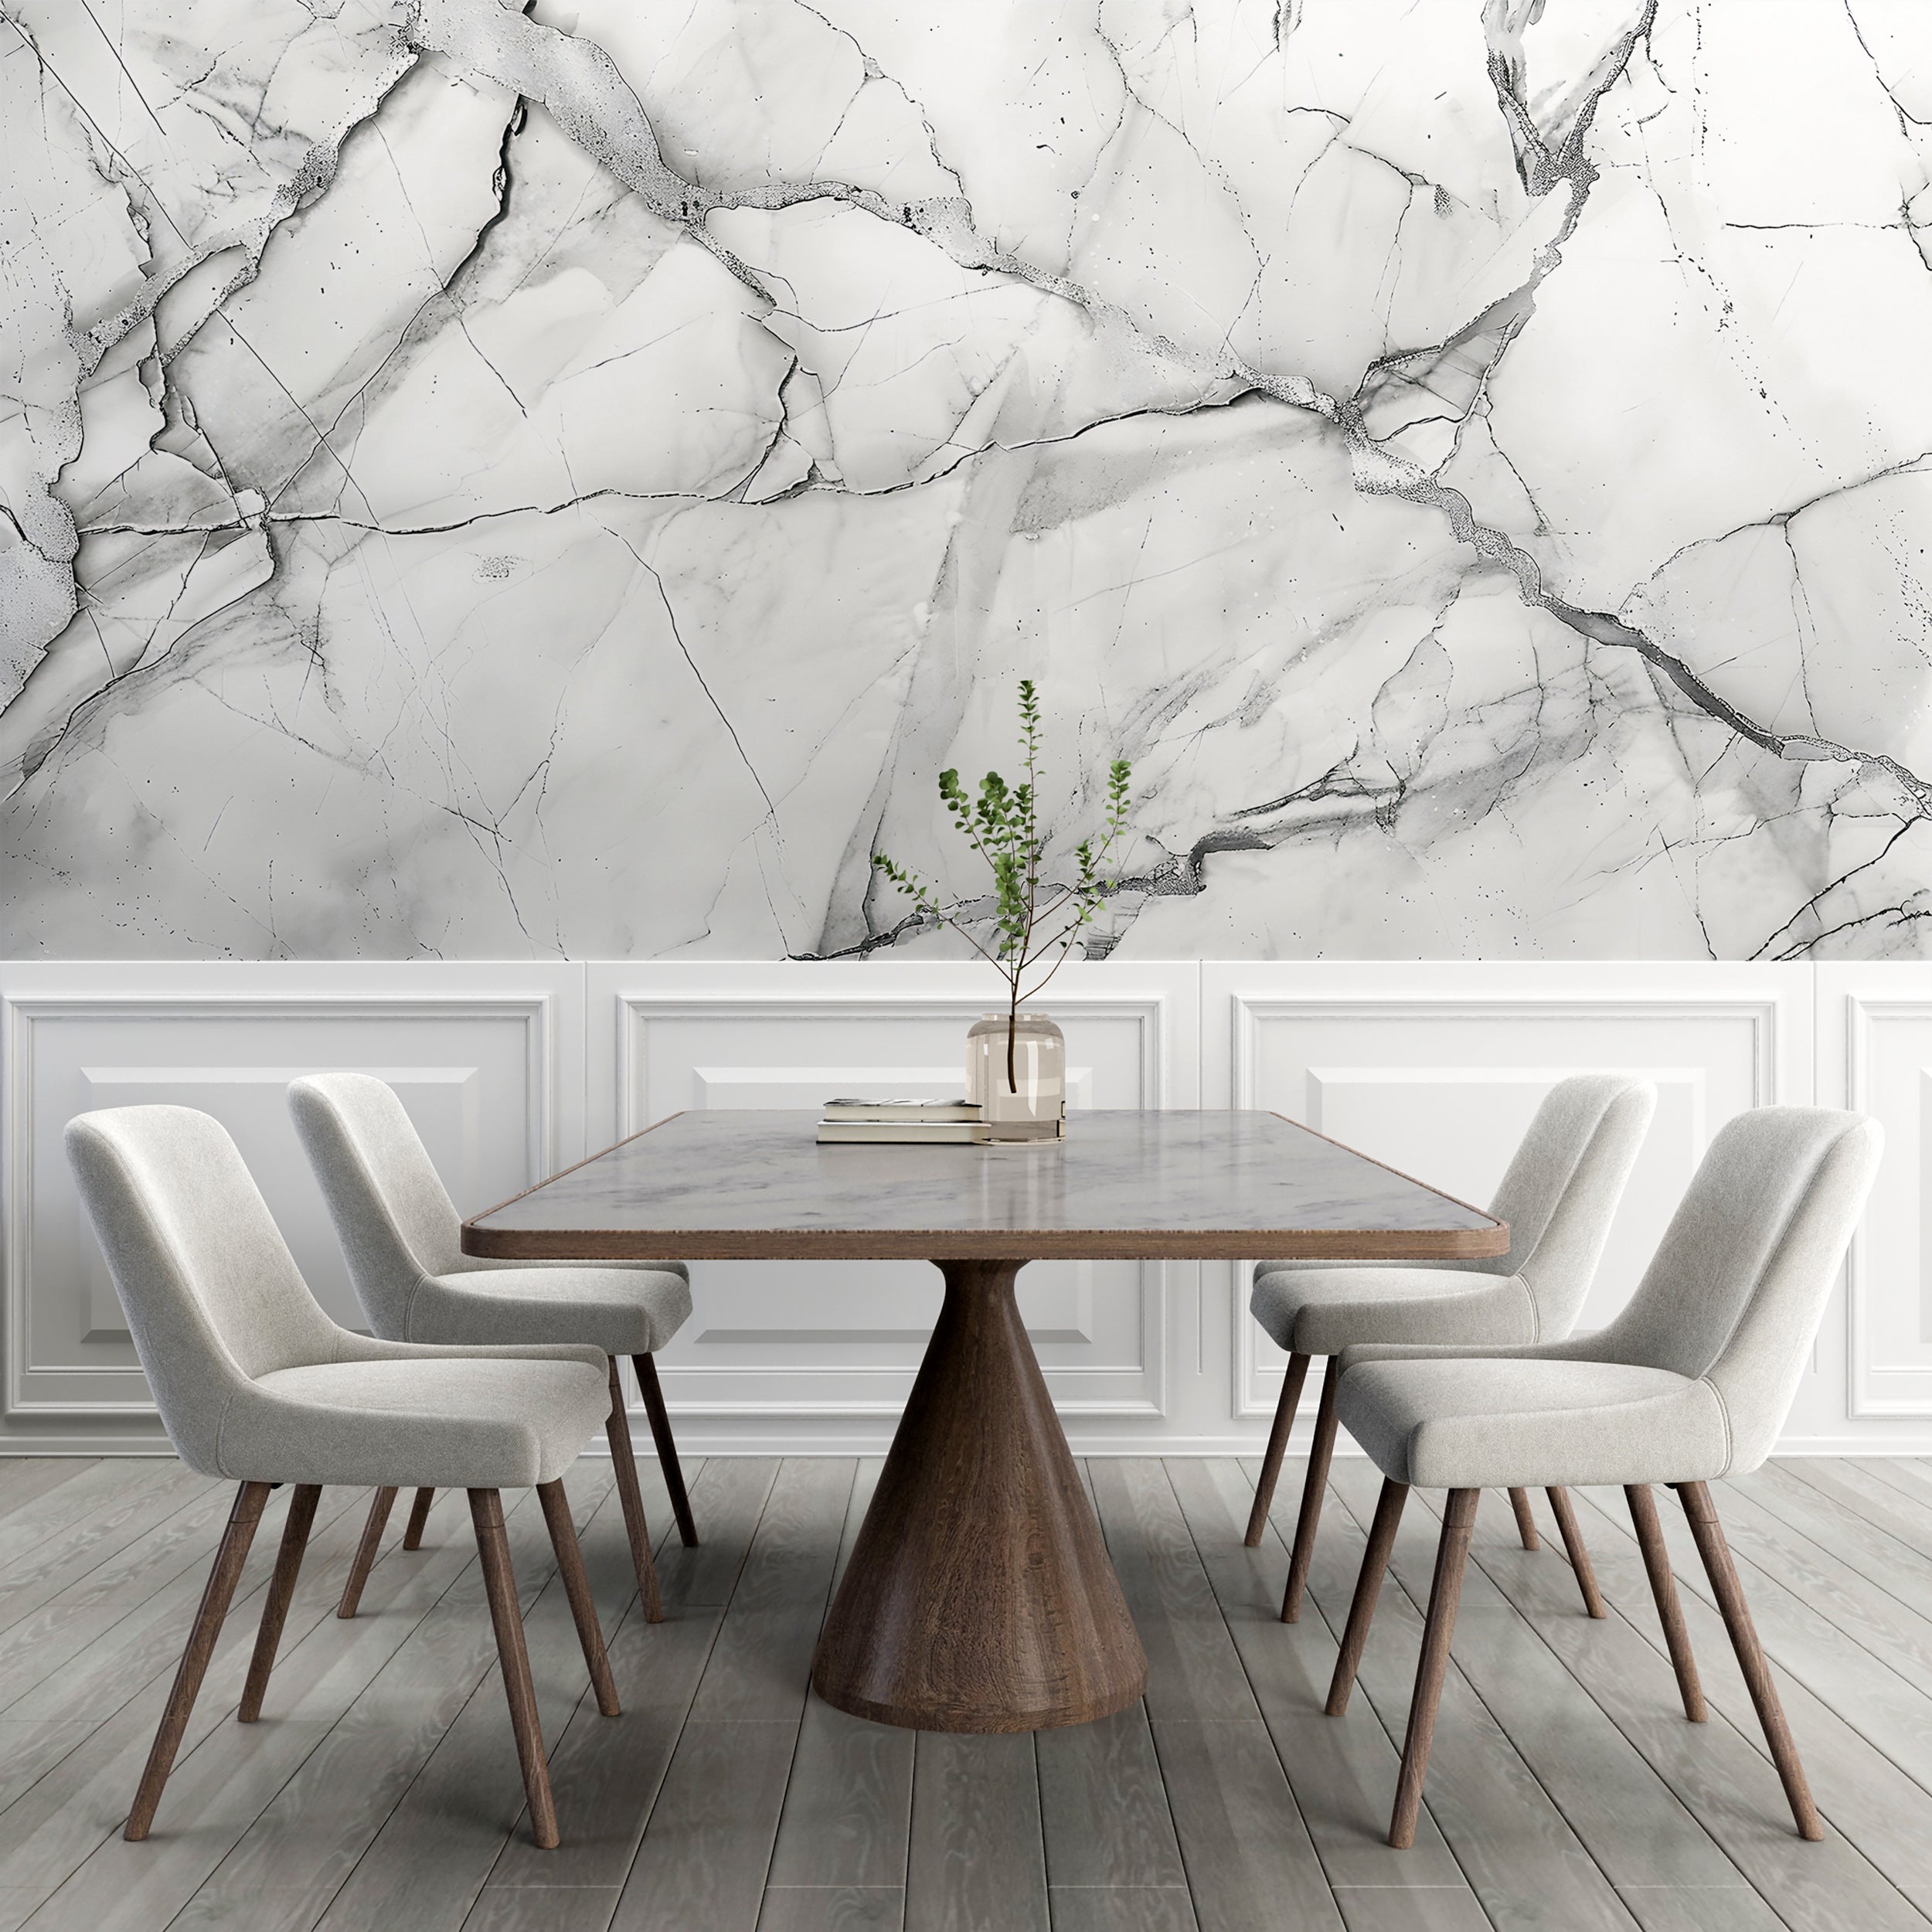 White and Grey Marble Wallpaper, Self-adhesive Natural Marble Wall Mural, Removable Modern Stone Texture Wall Decal, Luxury Decor